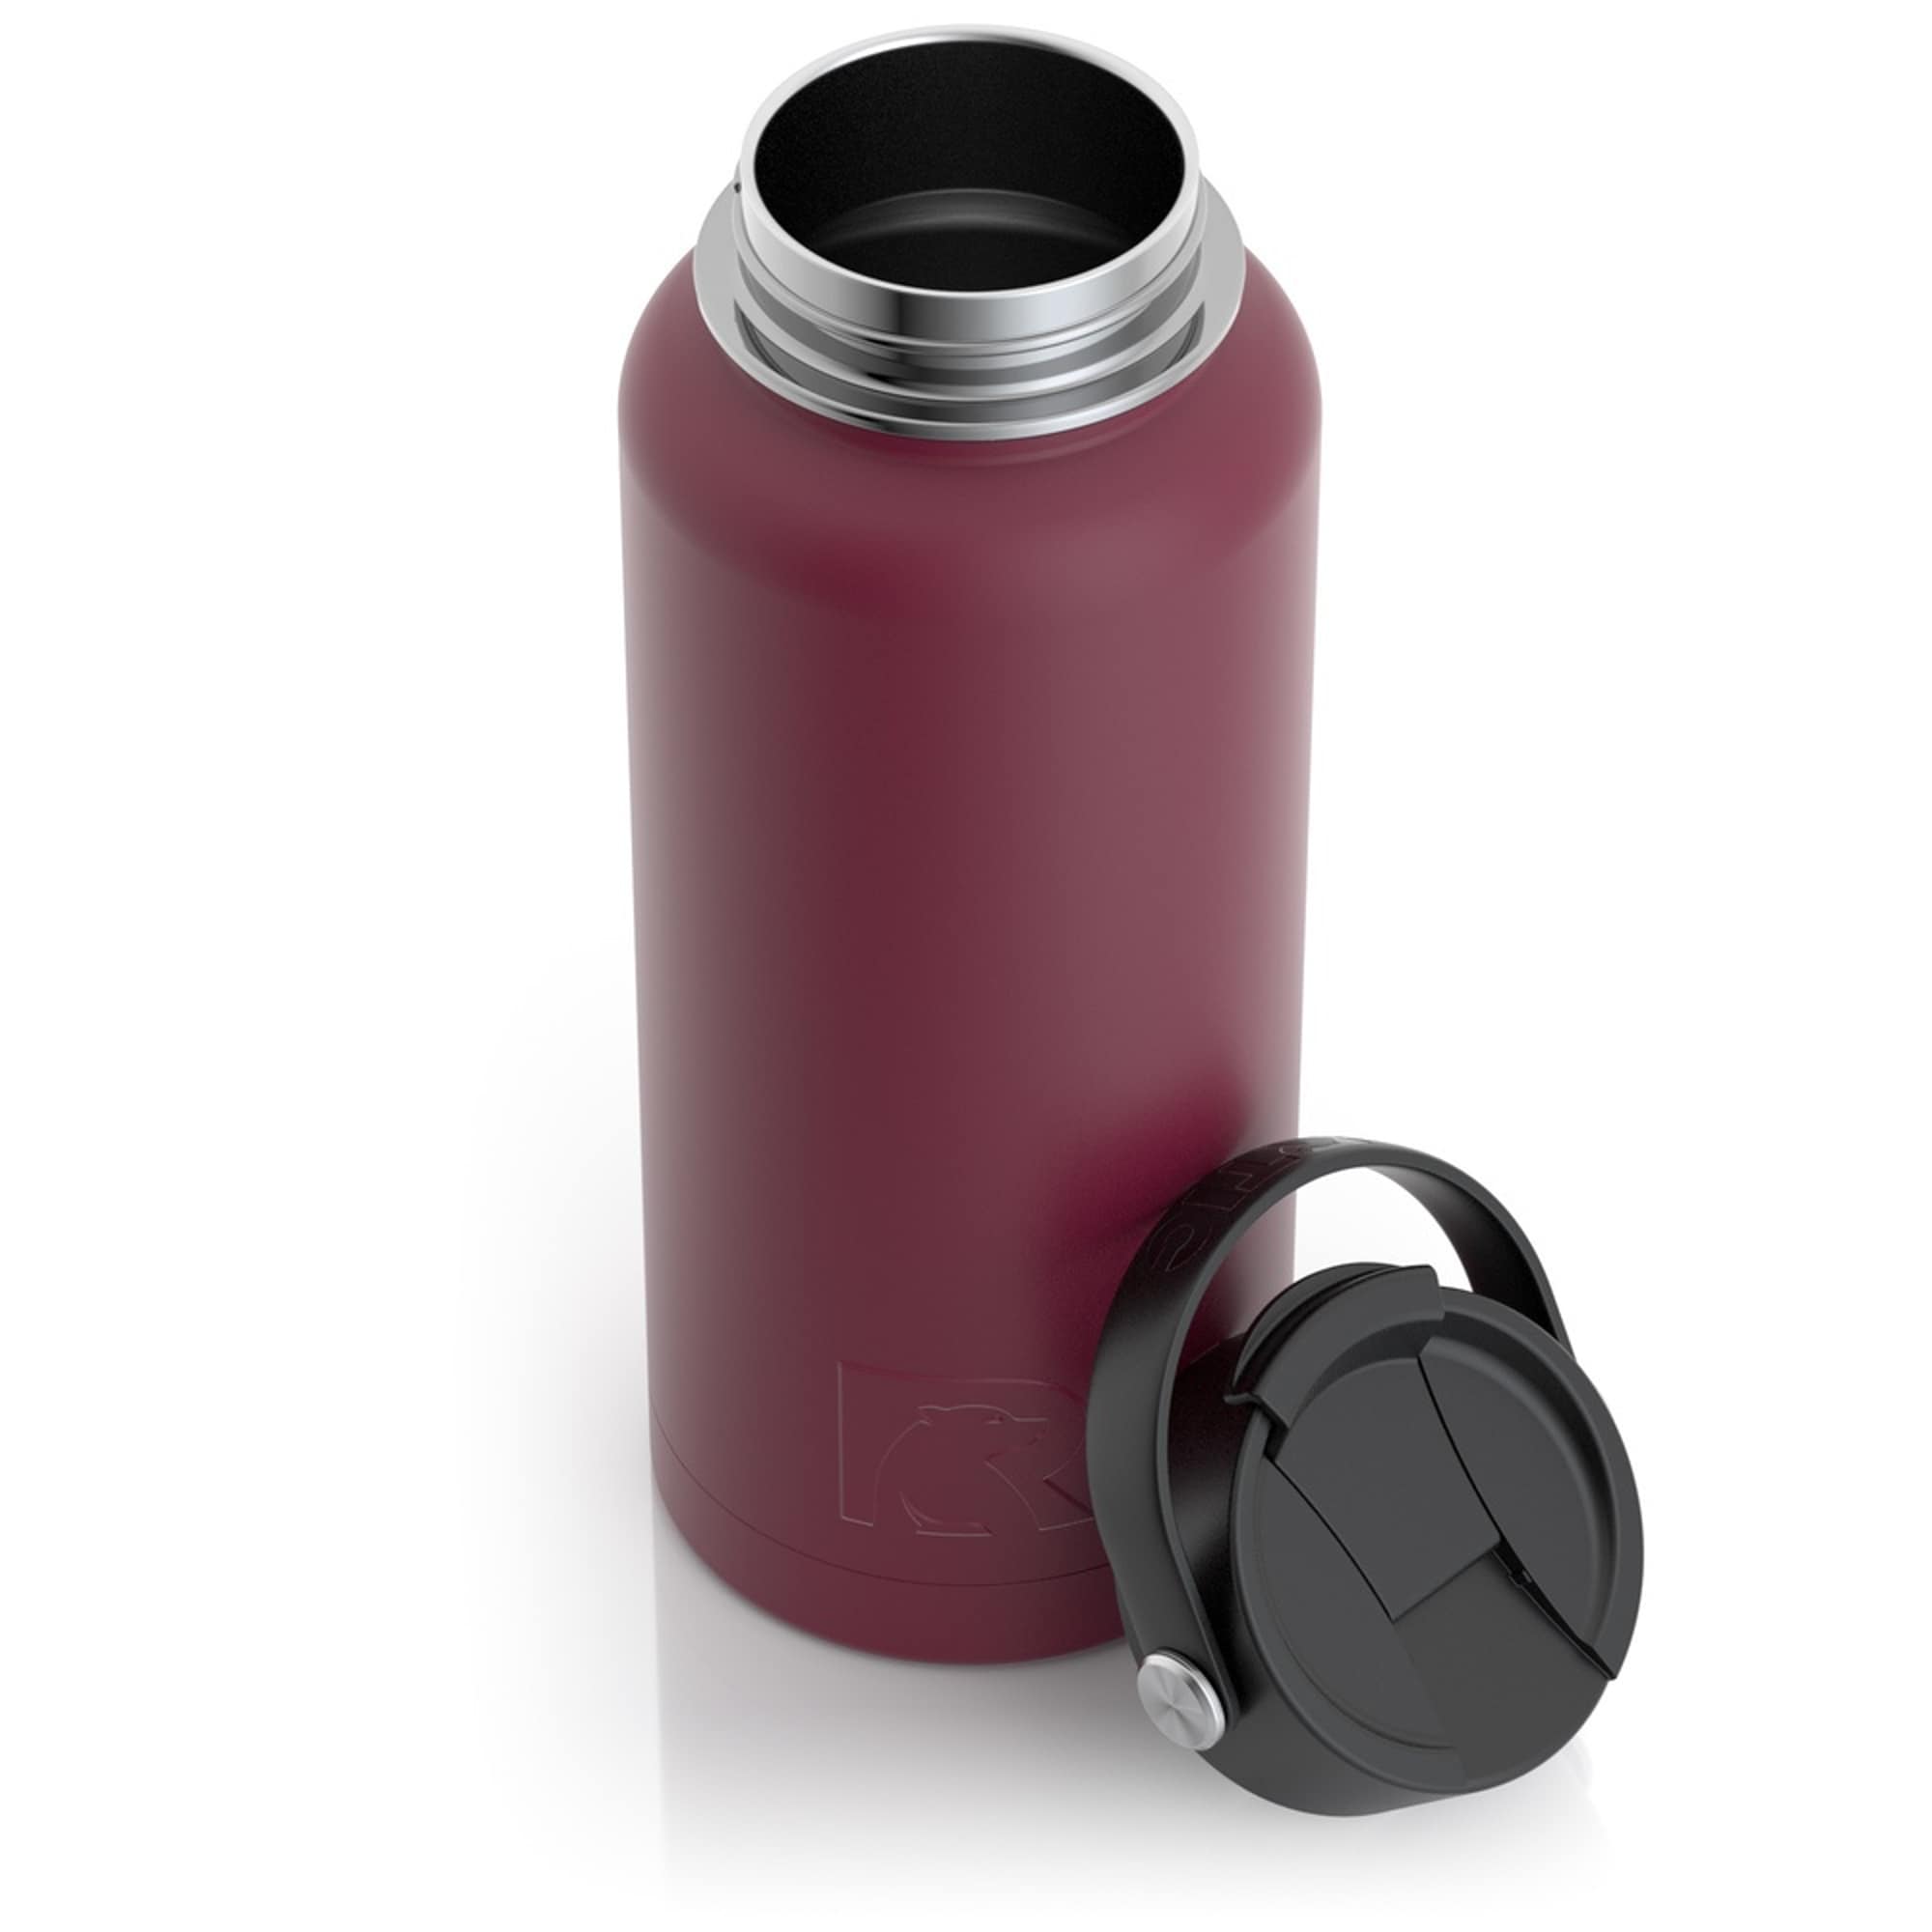  RTIC Coffee Mug, 12 oz, Maroon, Insulated Travel Stainless  Steel, Hot Or Cold Drinks, with Handle & Splash Proof Lid : Home & Kitchen